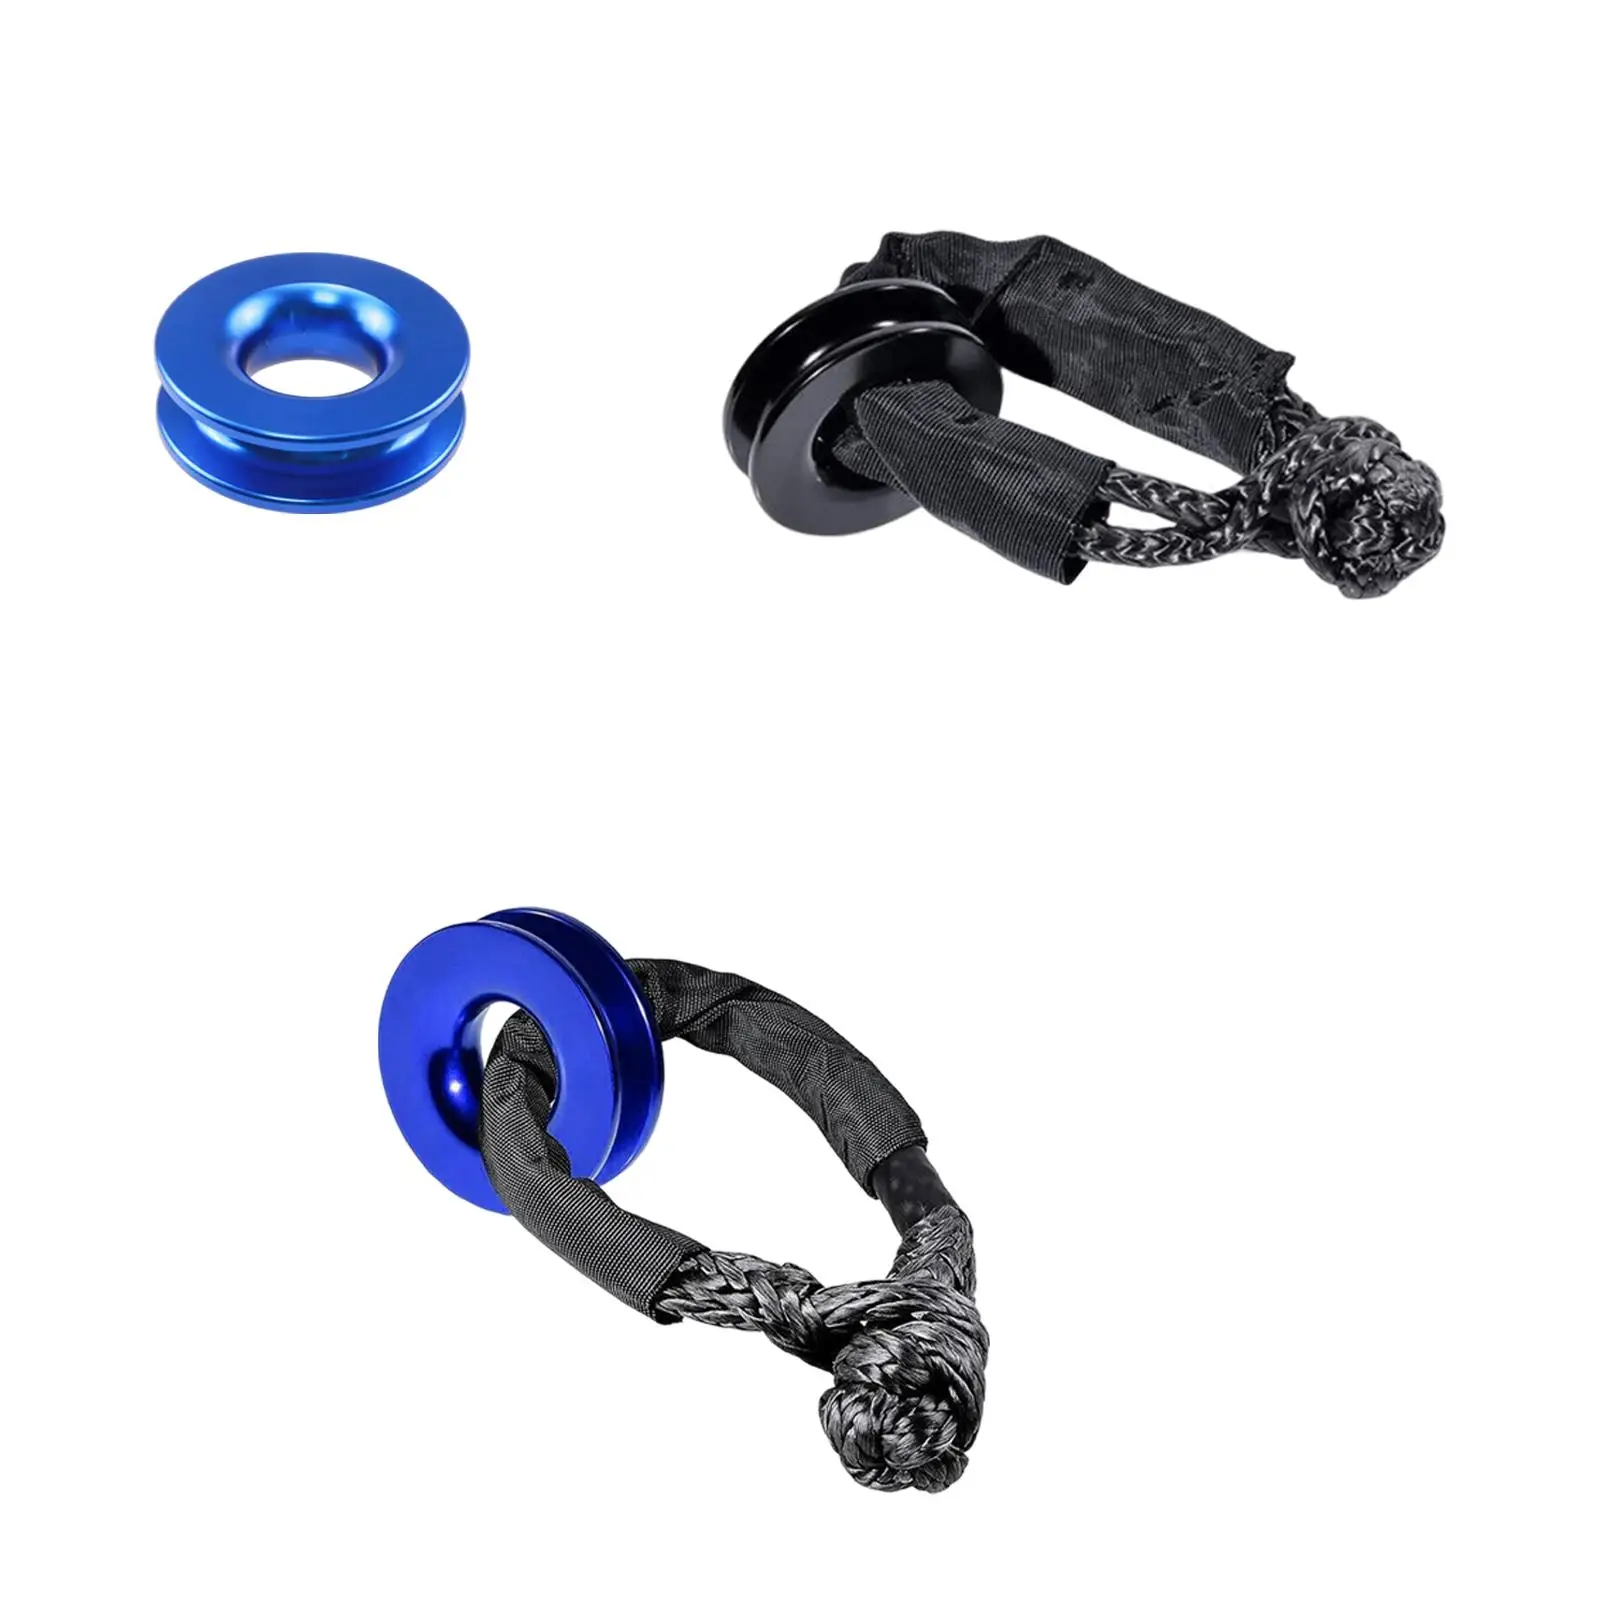 Recovery Ring for Recovery Strap and Recovery Rope for Tow Rope 41000lbs Snatch Recovery Ring for Soft Shackle ATV UTV SUV